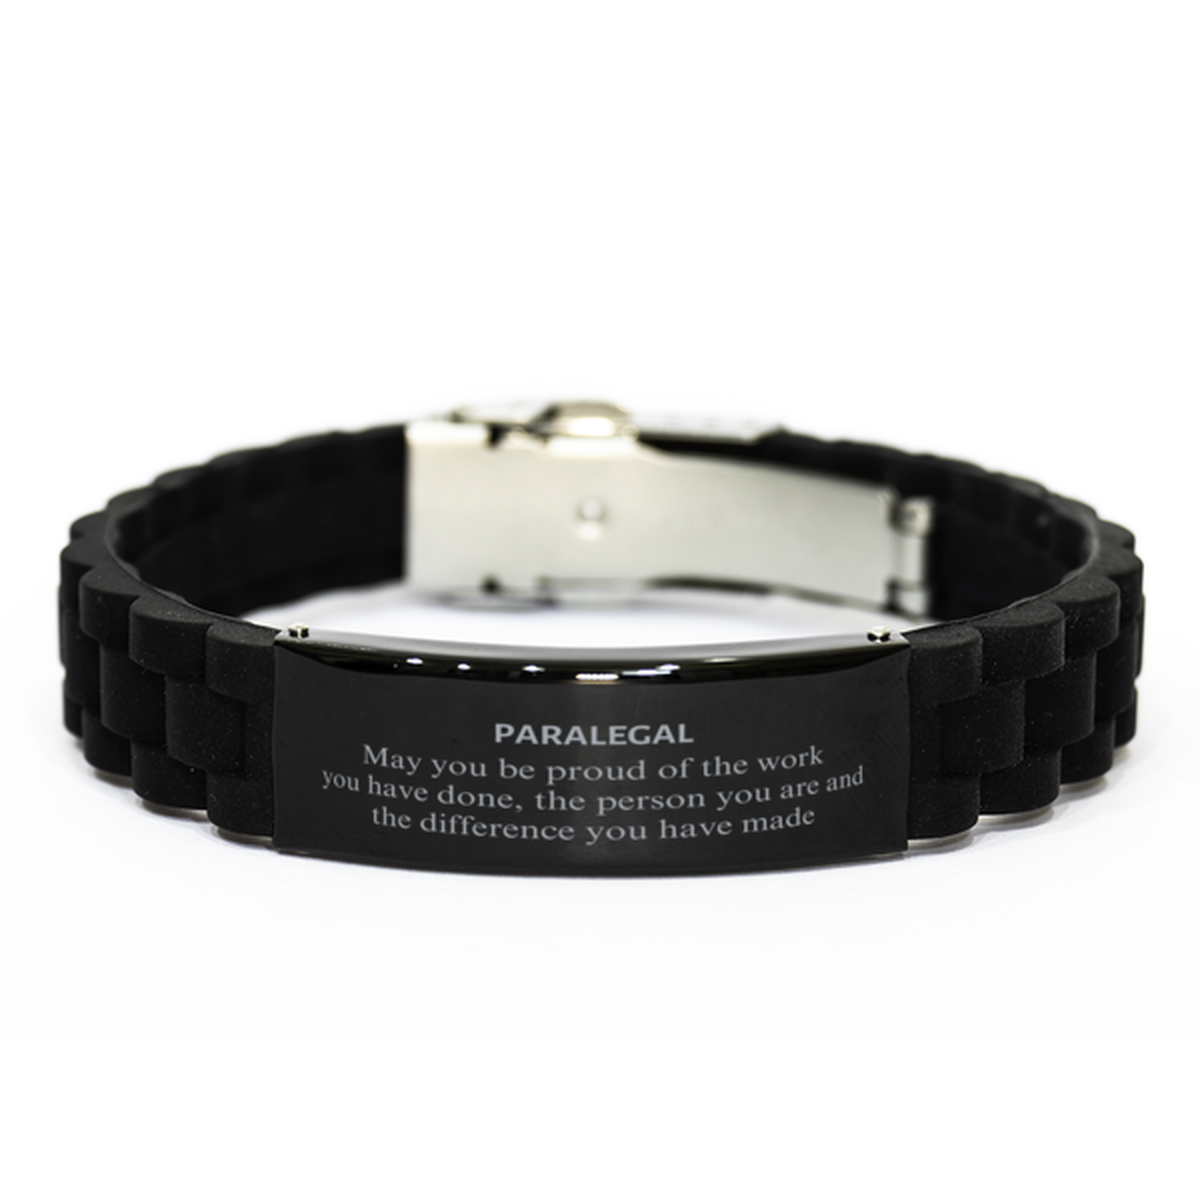 Paralegal May you be proud of the work you have done, Retirement Paralegal Black Glidelock Clasp Bracelet for Colleague Appreciation Gifts Amazing for Paralegal